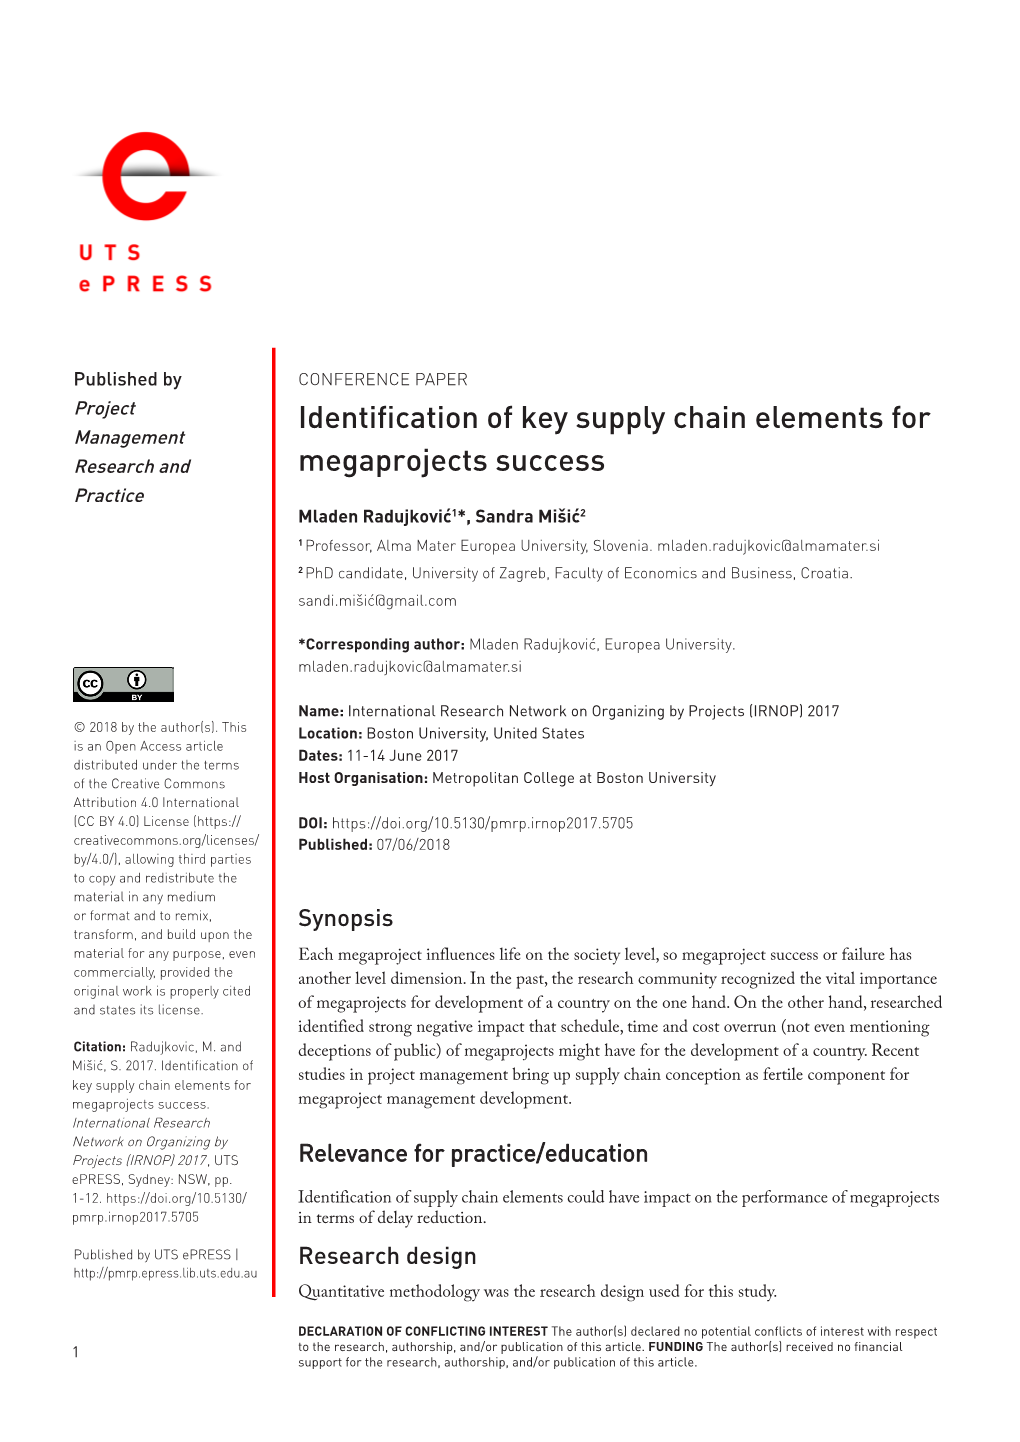 Identification of Key Supply Chain Elements for Megaprojects Success. International Research Network on Organizing by Projects (IRNOP) 2017, UTS Epress, Sydney